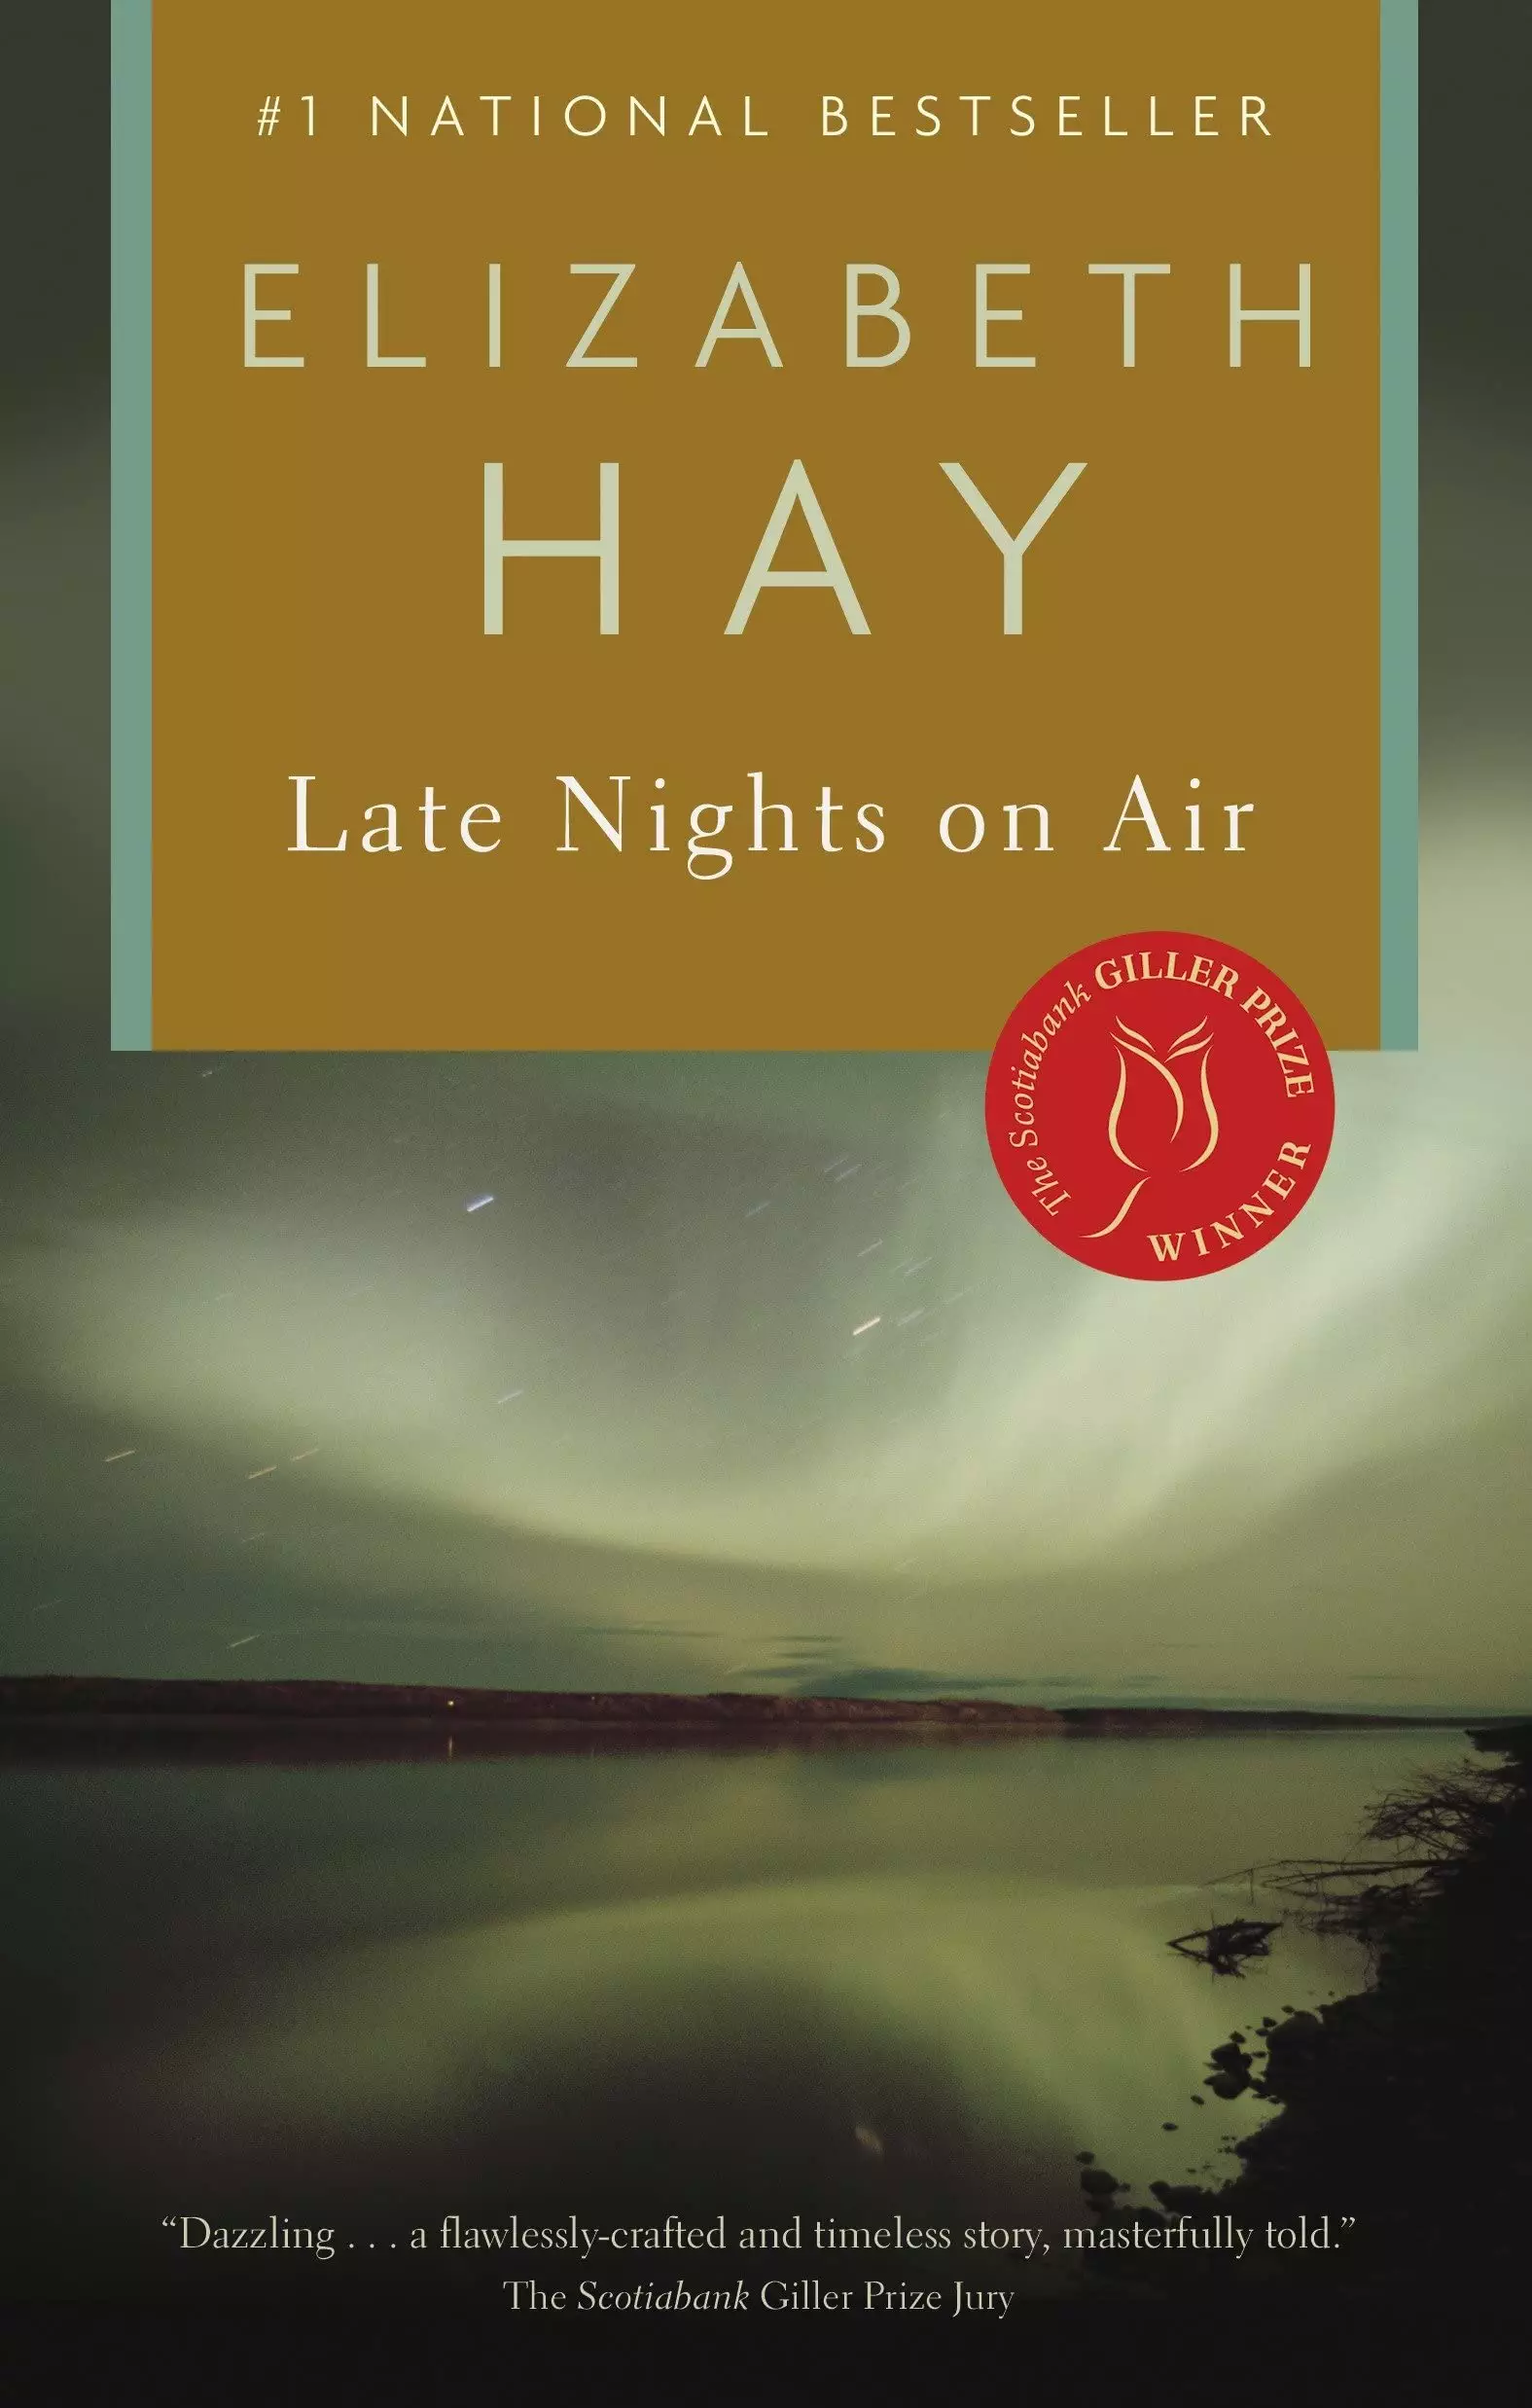 Buy Late Nights on Air Book Online at Low Prices in India | Late Nights on  Air Reviews & Ratings - Amazon.in